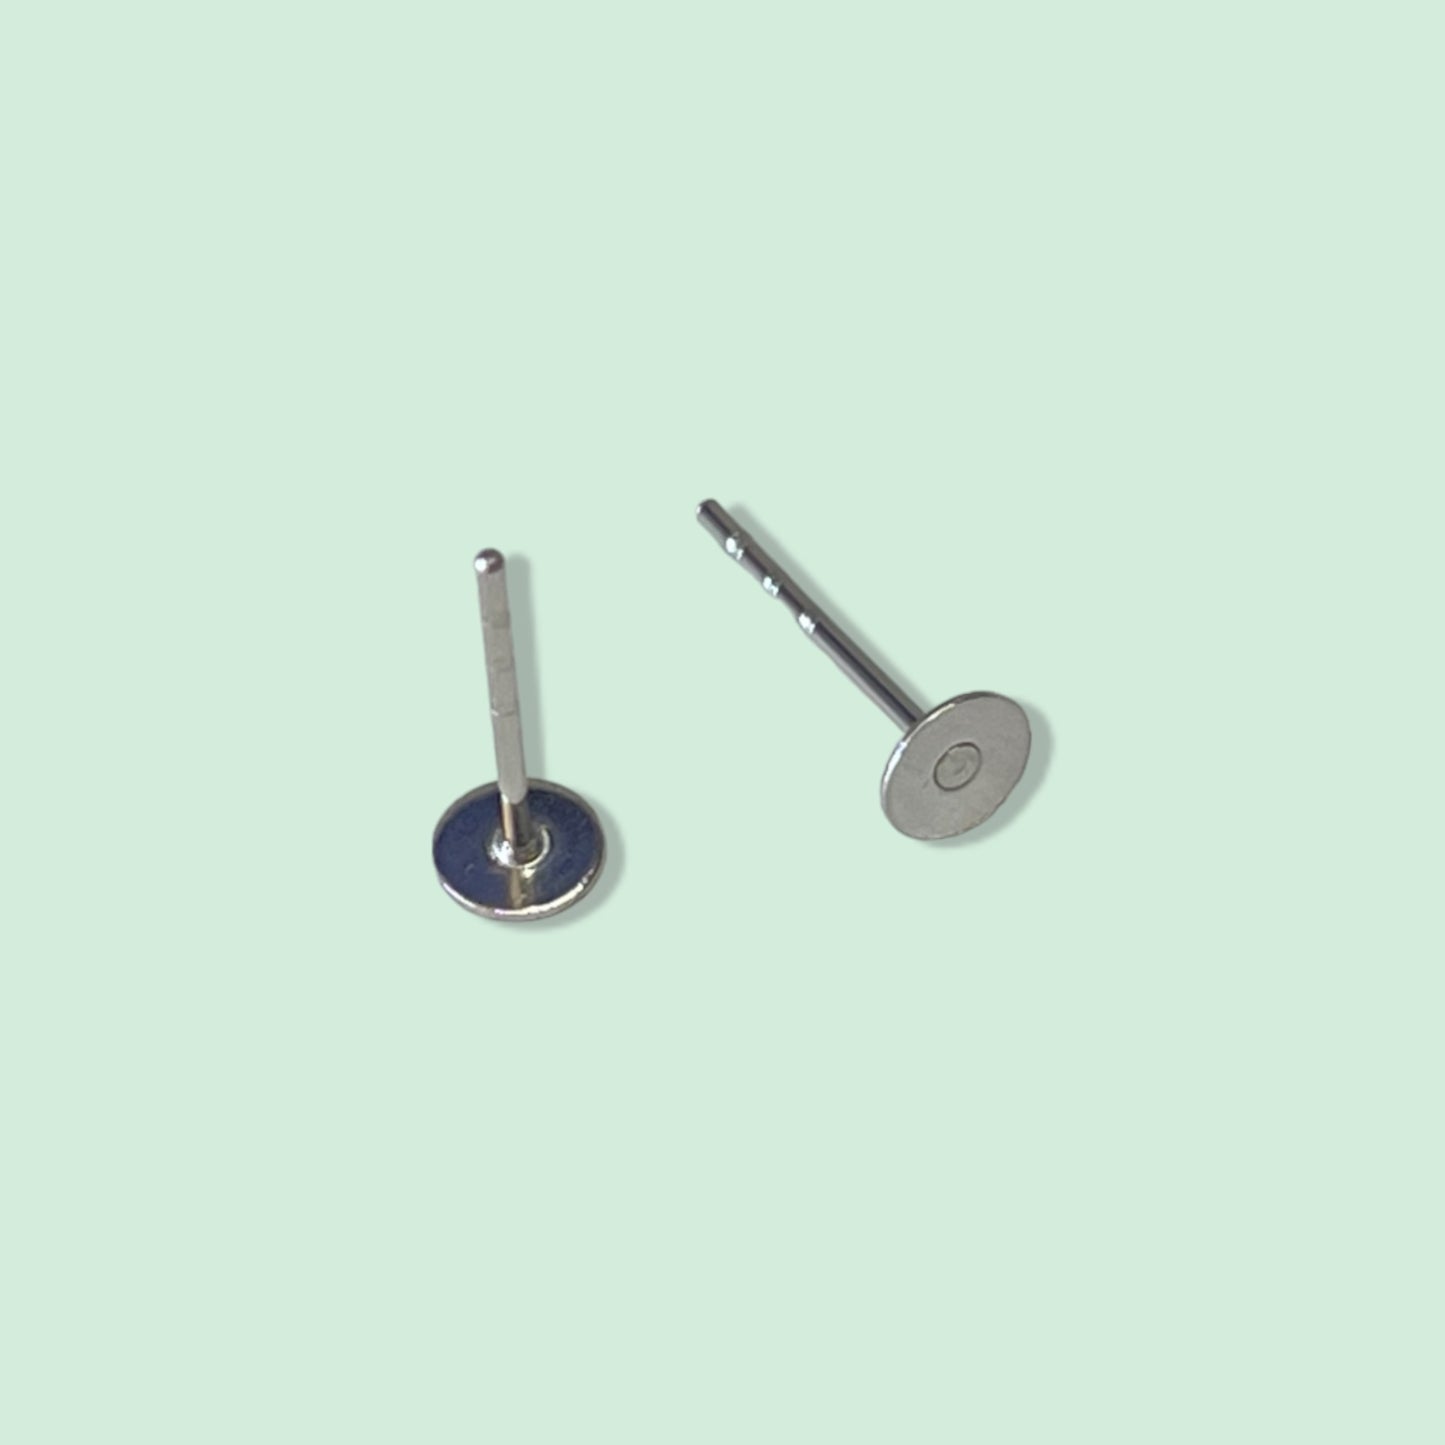 316 Surgical Stainless Steel Earring Posts - 4mm - including earring backs